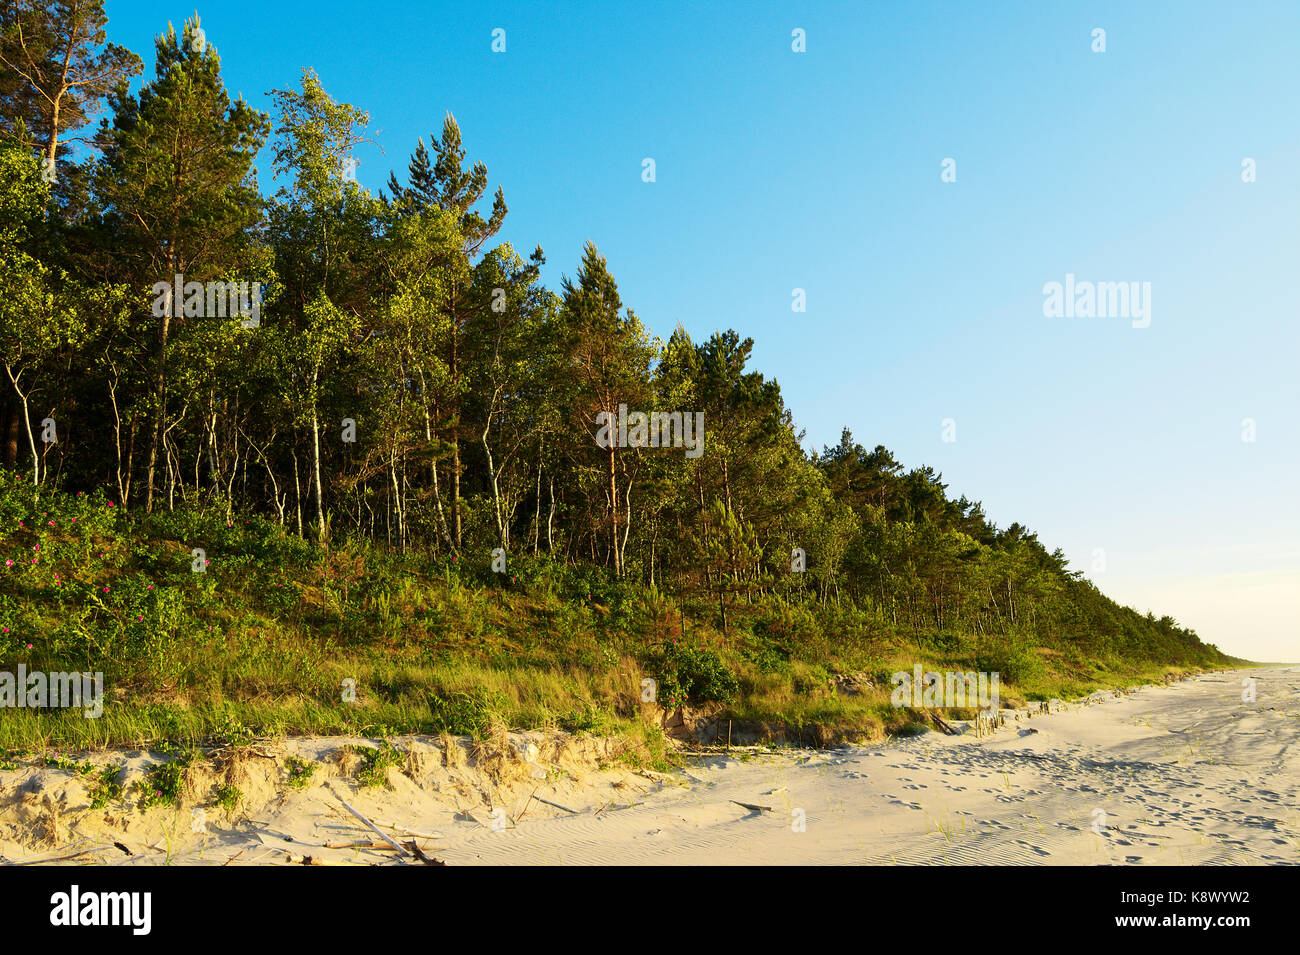 Pinewood growing on dunes at Baltic coast. Scots or Scotch pine Pinus sylvestris trees in evergreen coniferous forest. Stegna, Pomerania, Poland. Stock Photo